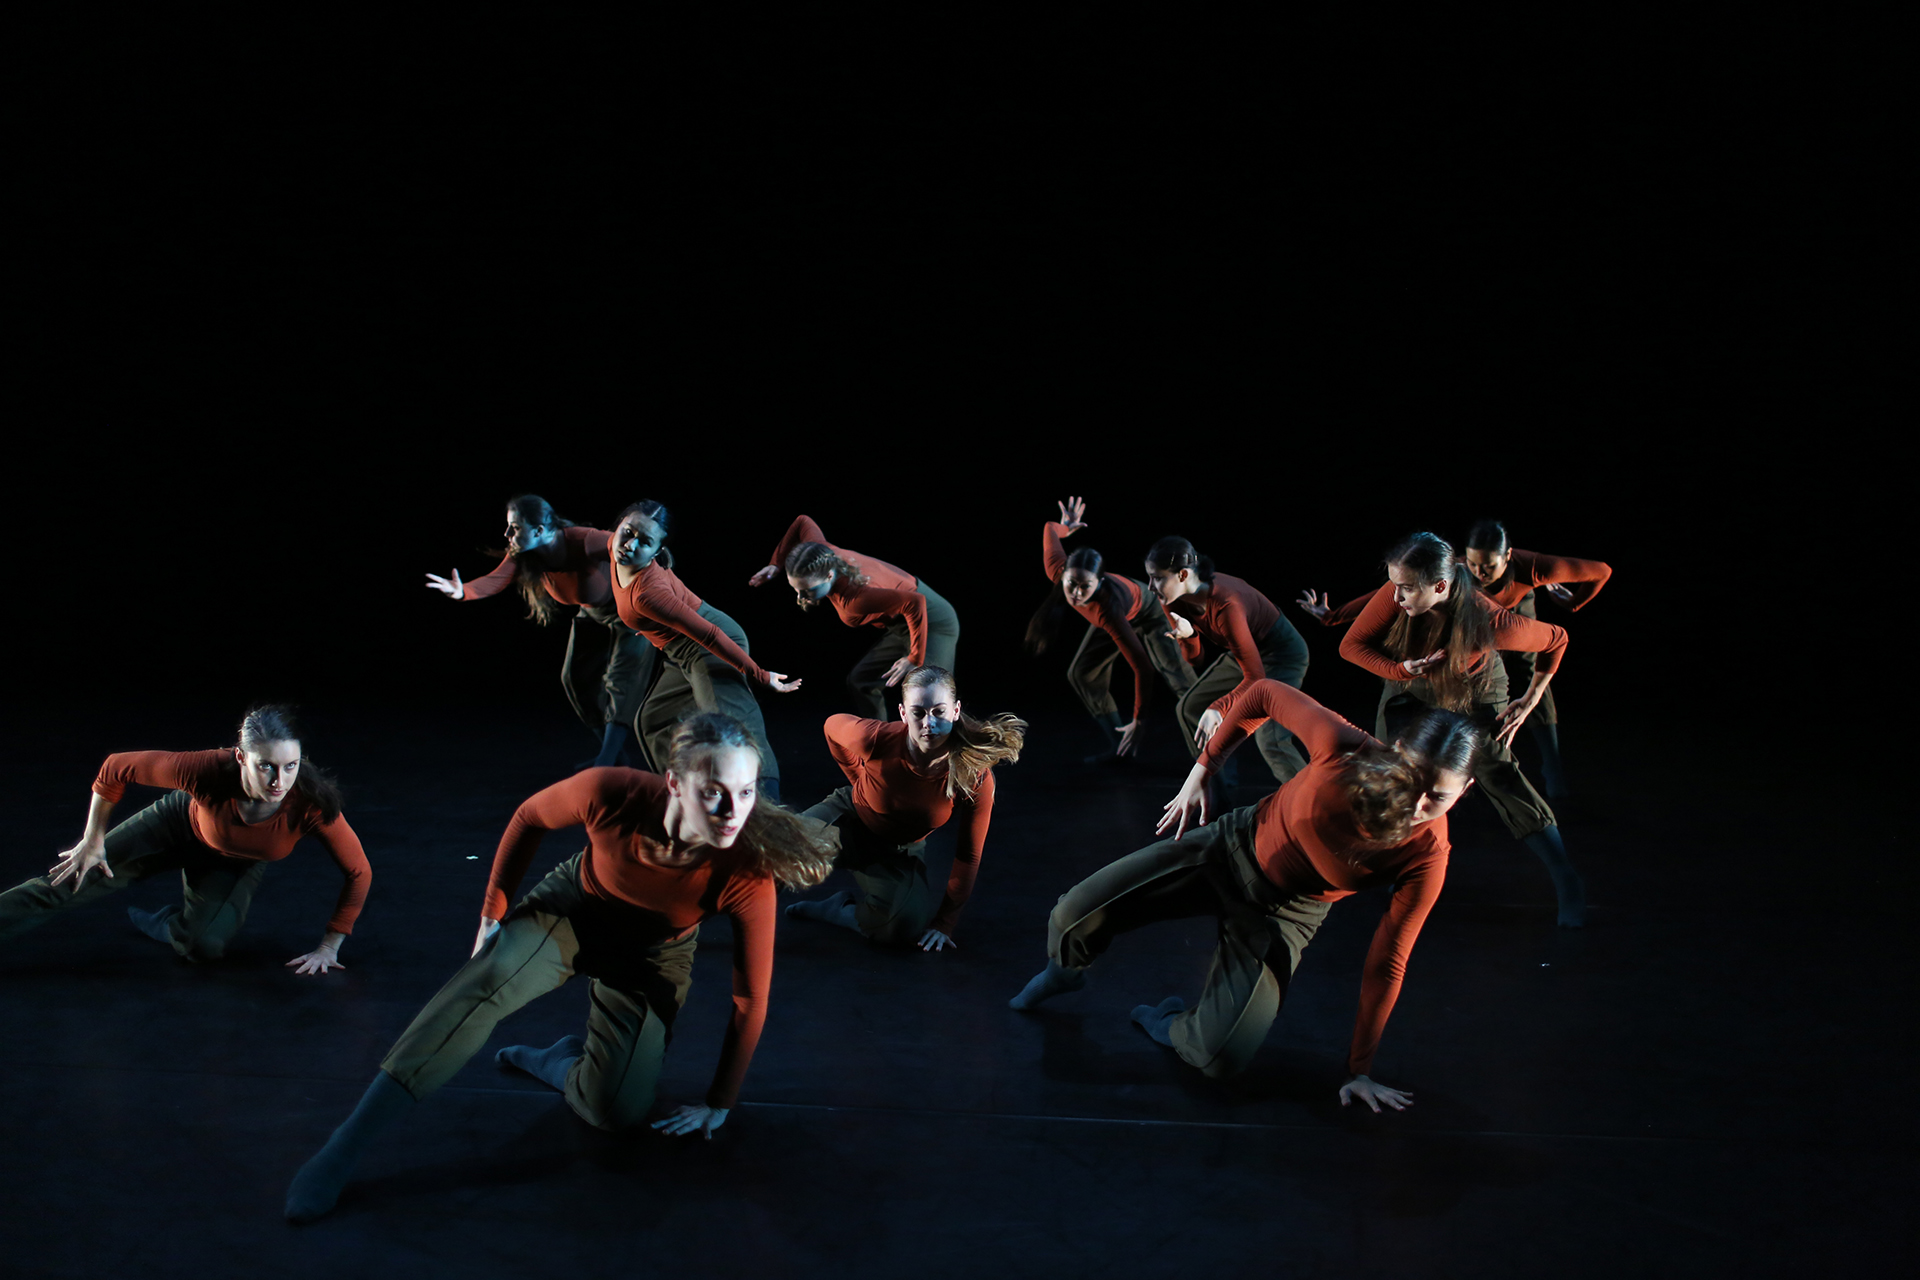 SADC October 2018 "In Company" Choreographed by Yin-Yue Dance Company